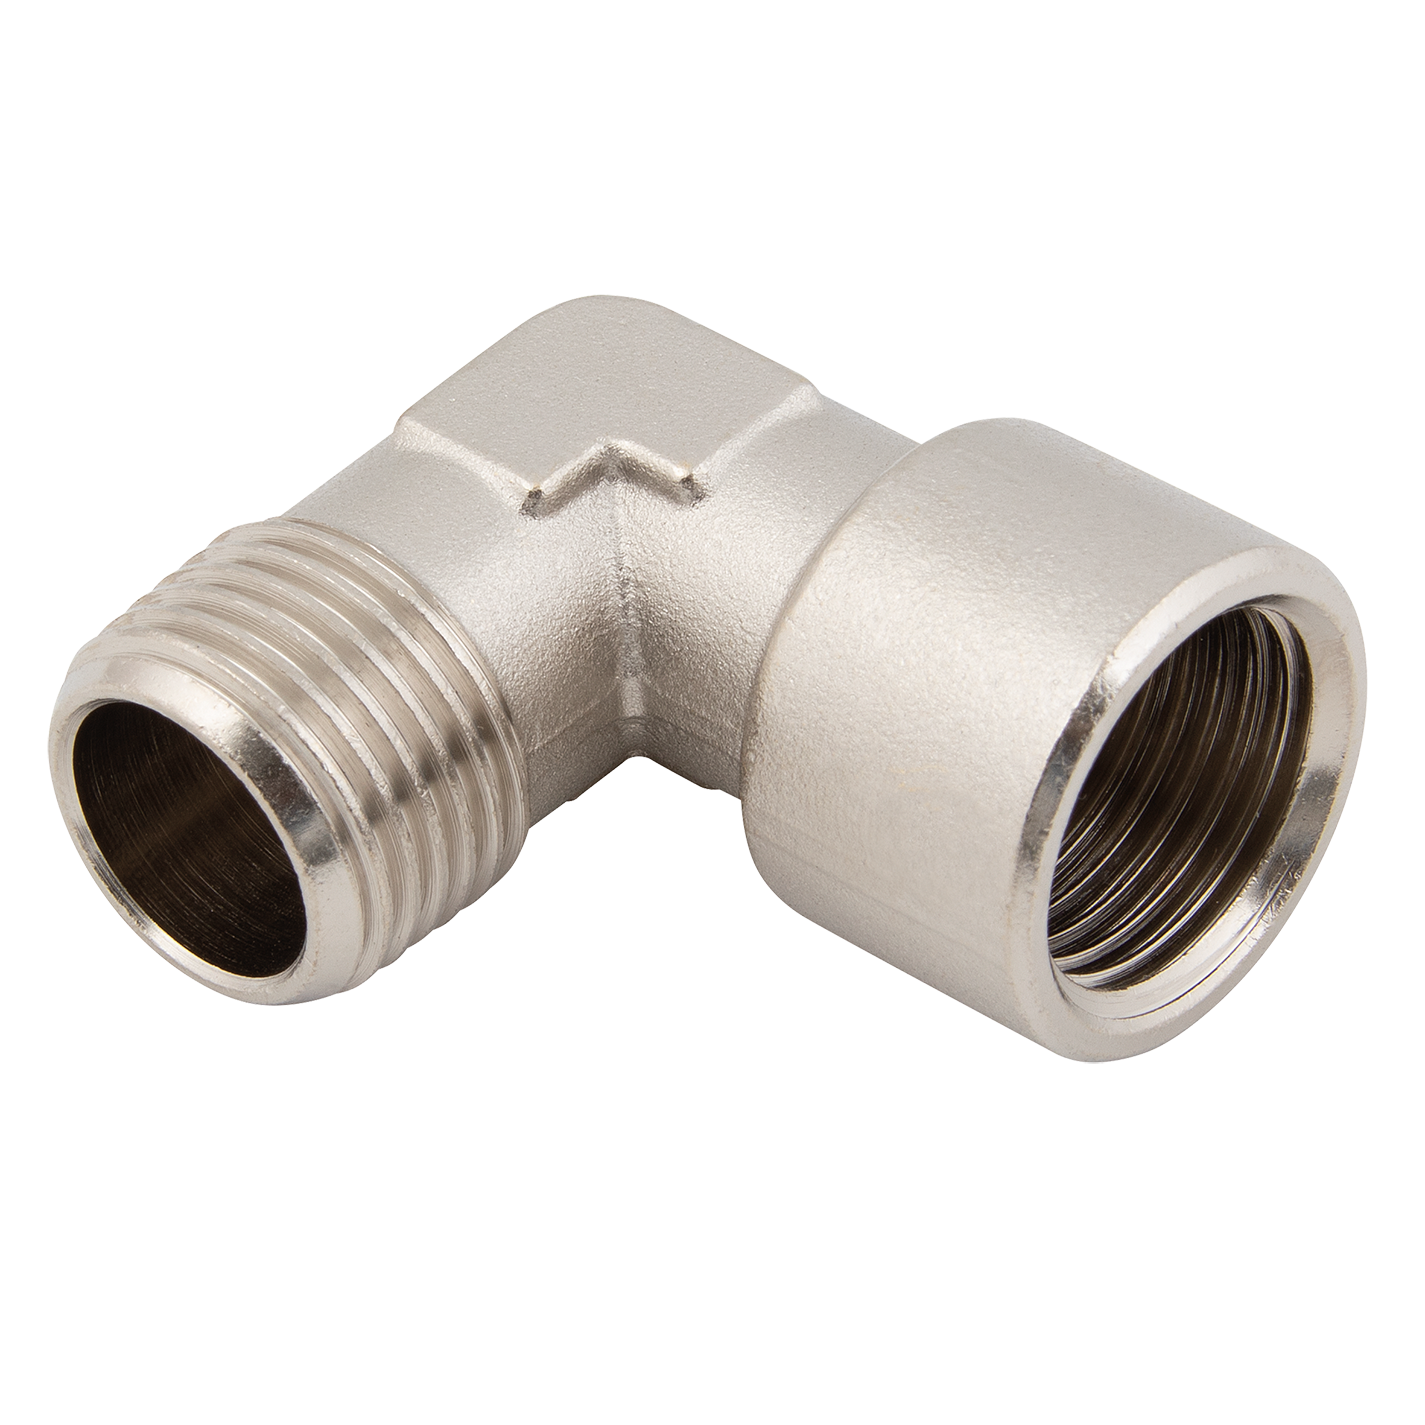 1/2" BSPT Male x 1/2" BSPP Female Equal Elbow